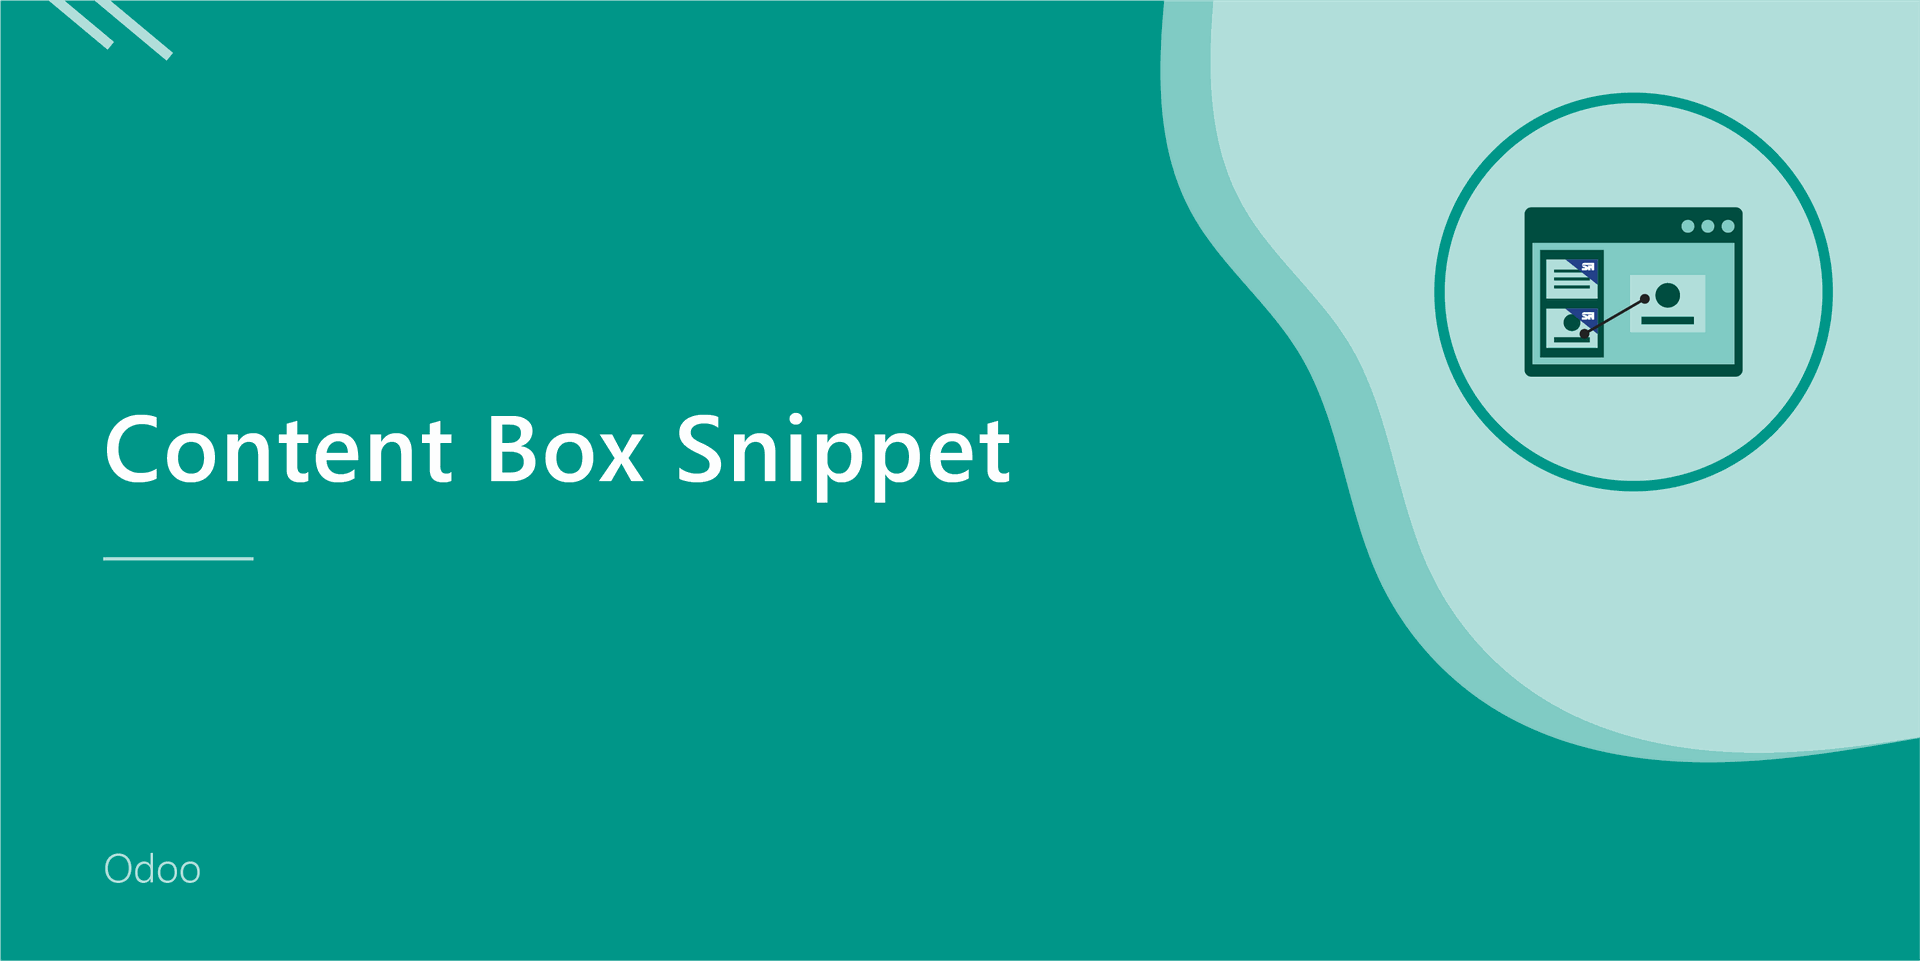 Content Box Snippet